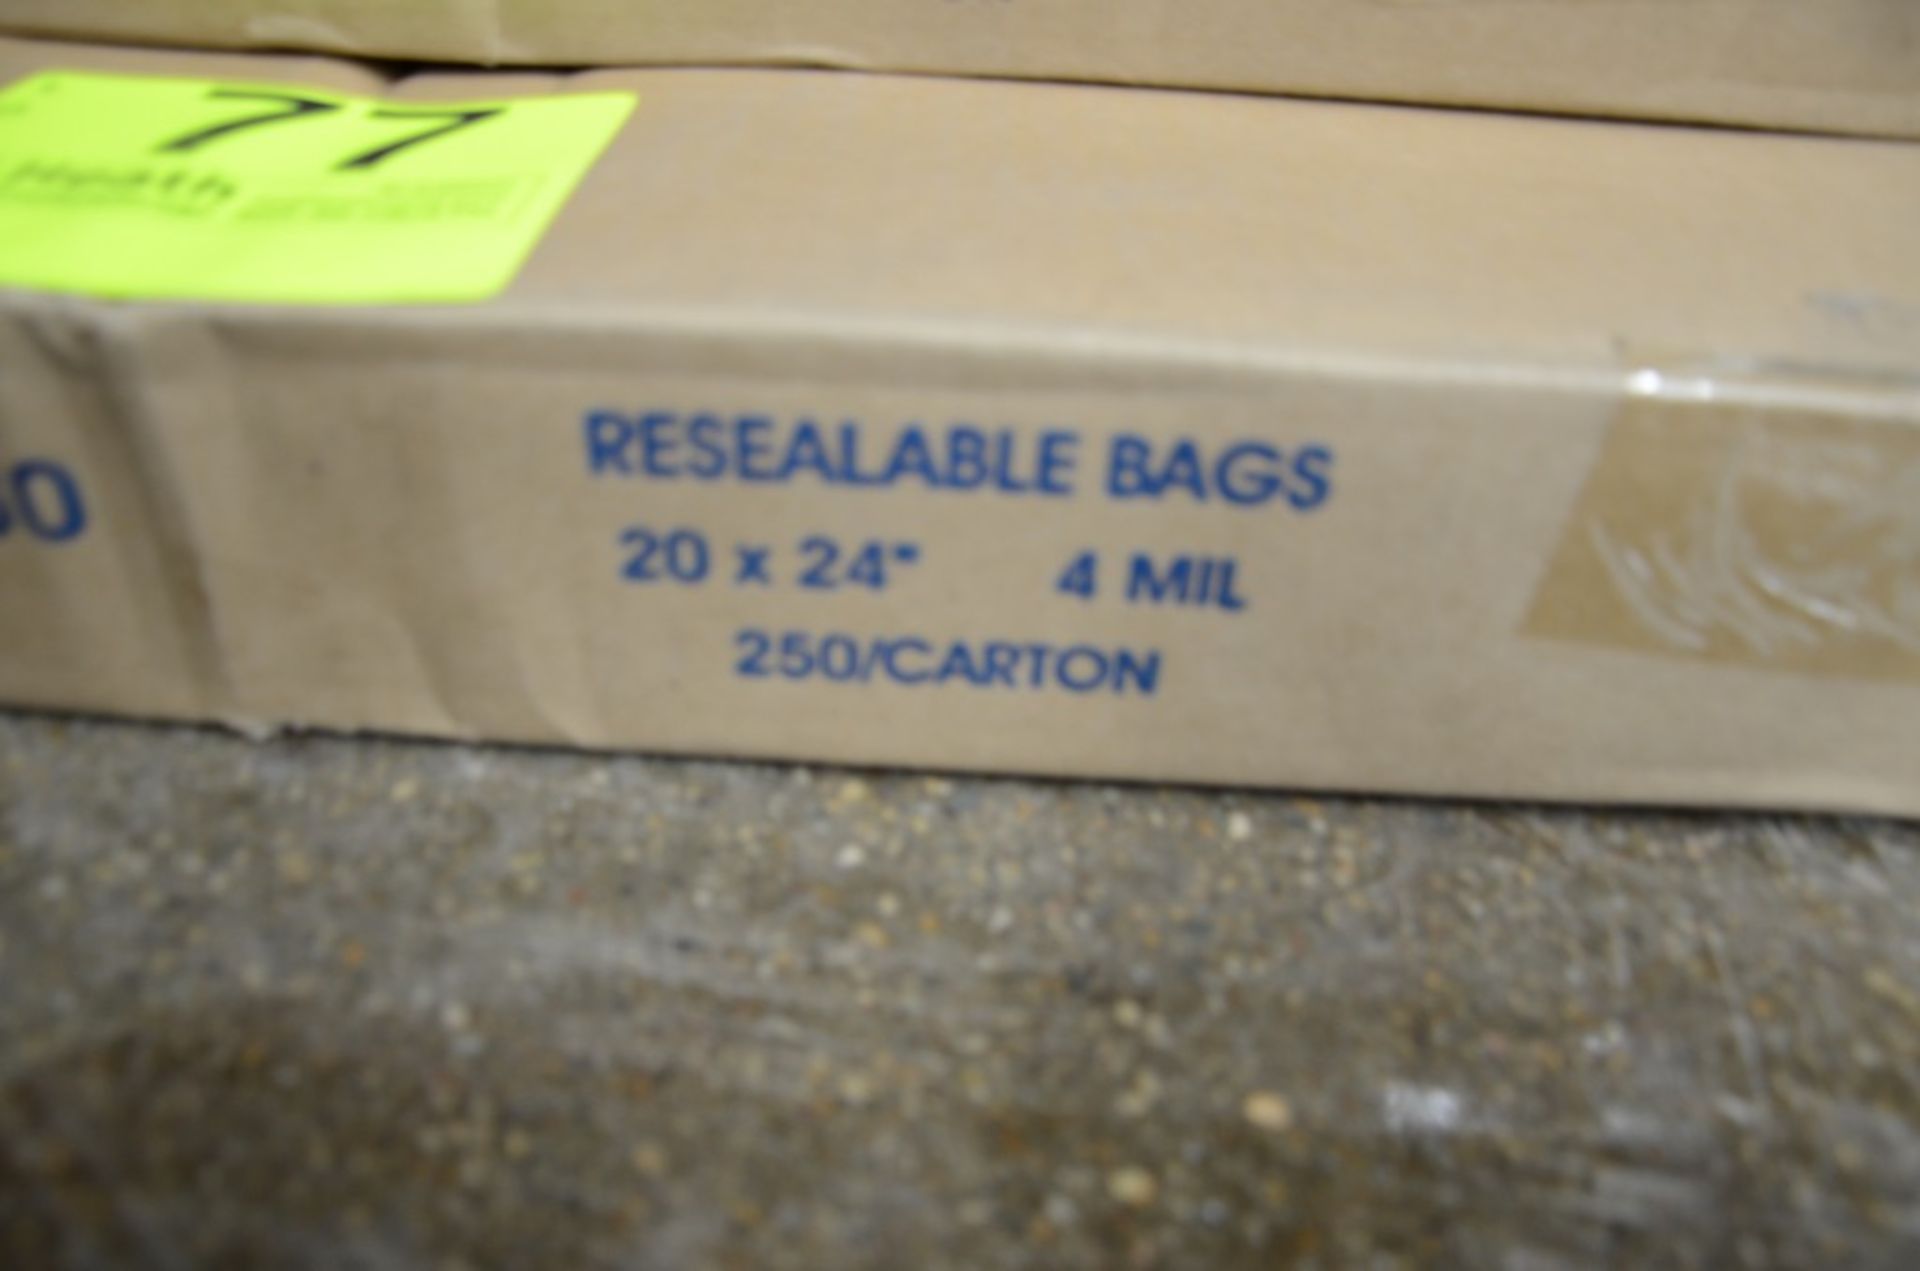 (2) CASES ULINE S-12280 RESEALABLE BAGS, 20" X 24", 4 MIL, (250) PER CASE - Image 2 of 2